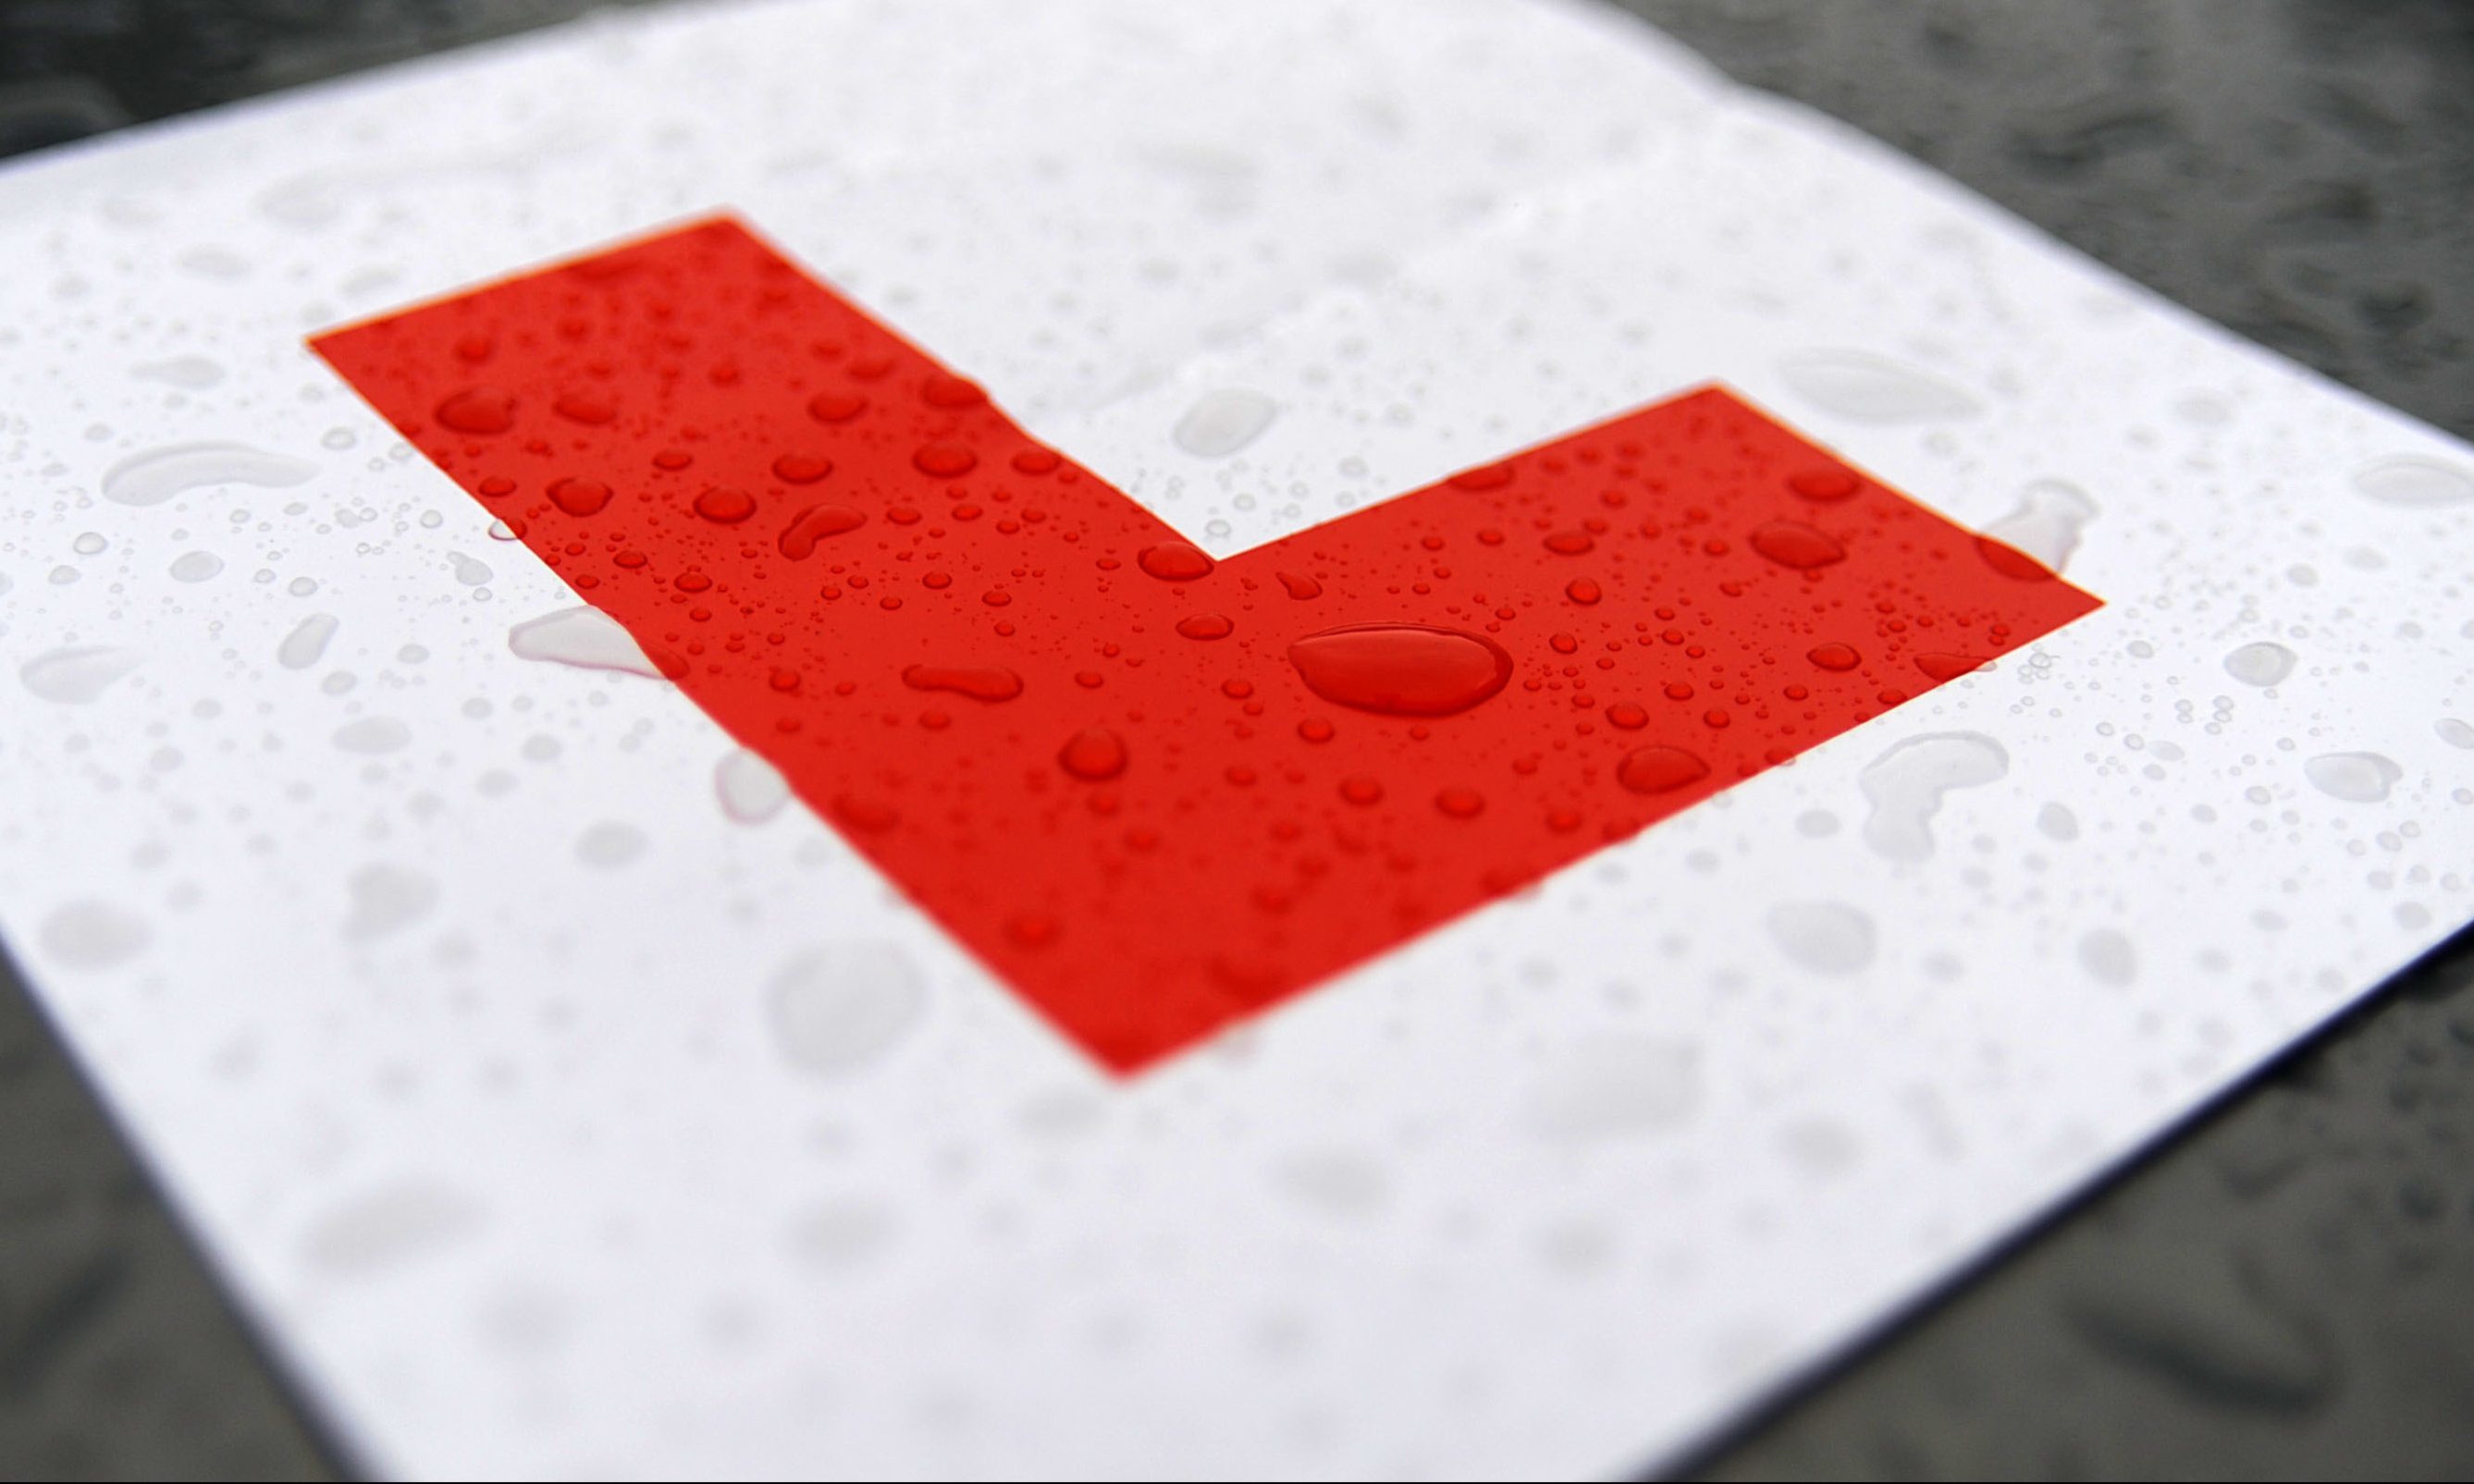 Dixon failed to show L plates or be accompanied by a qualified driver.